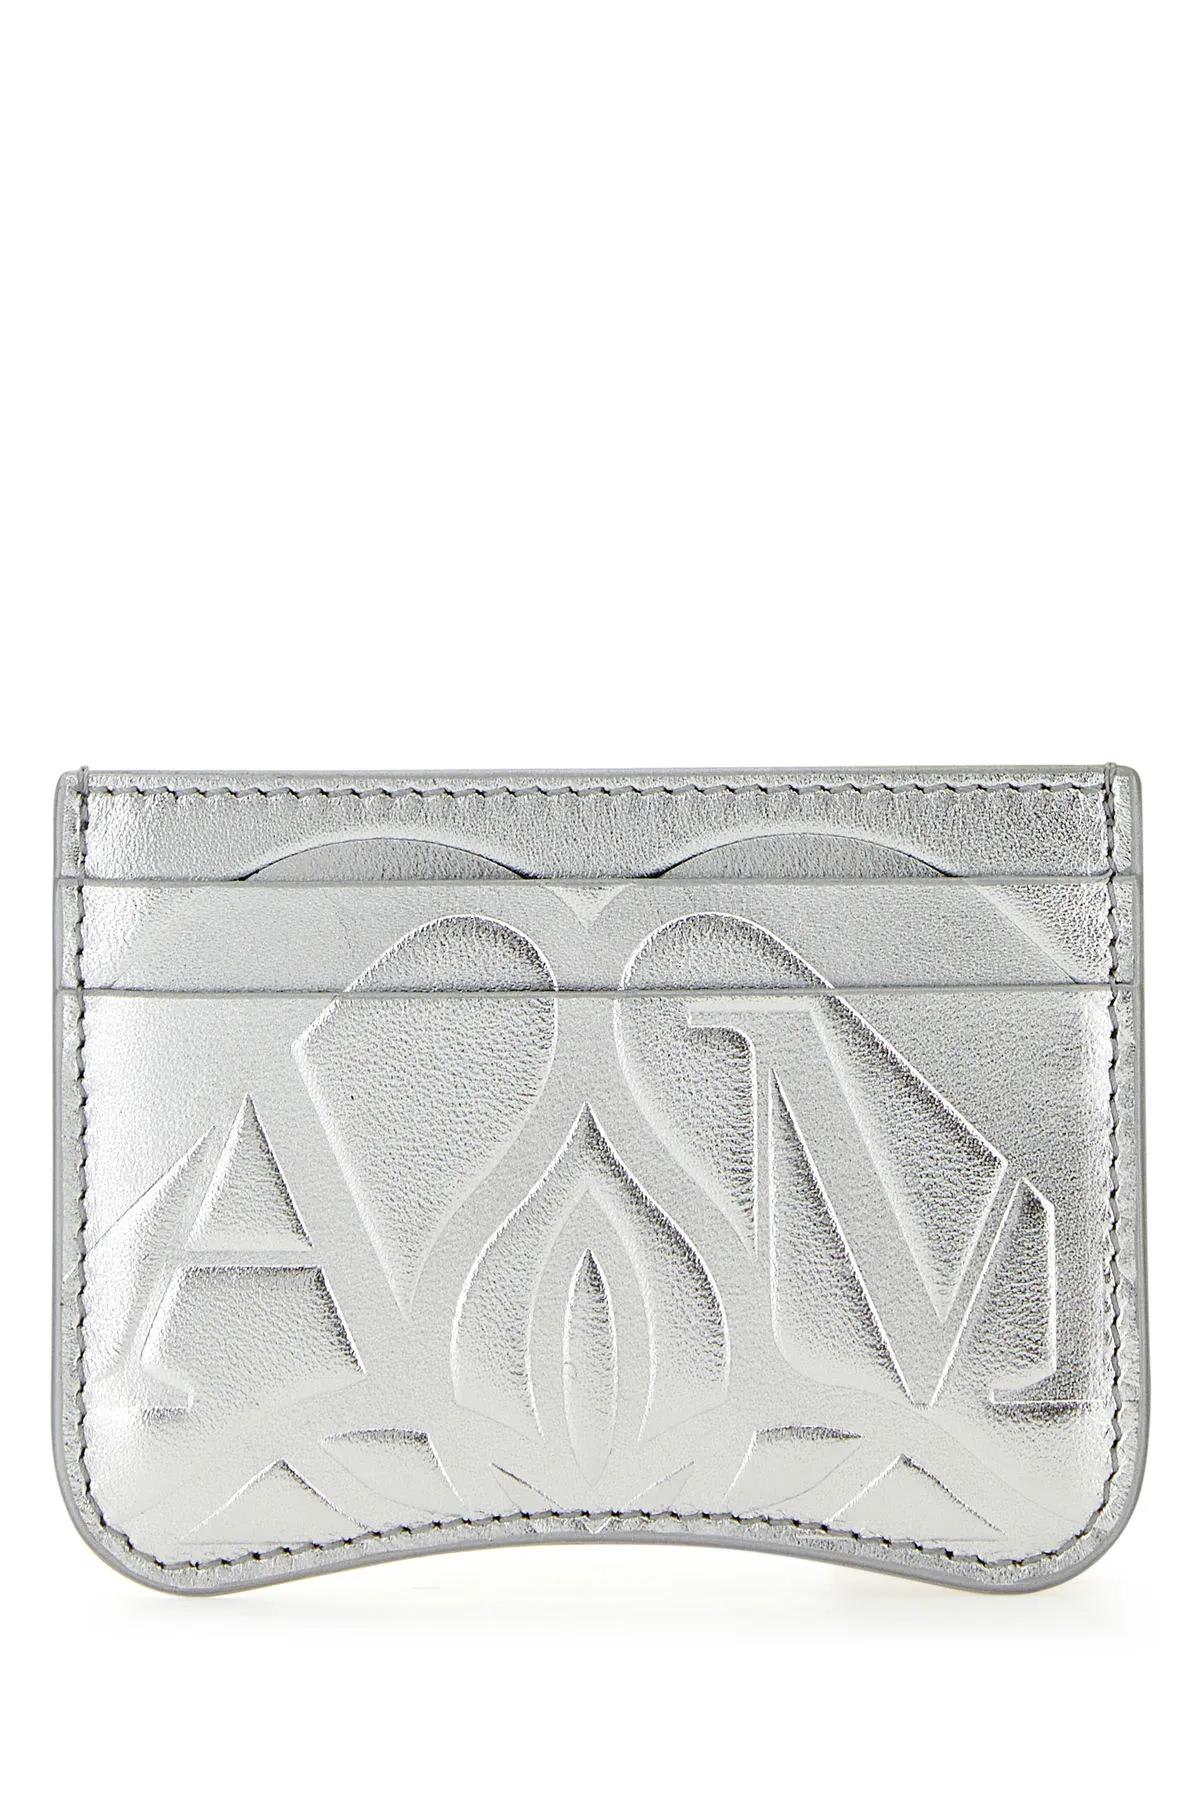 Alexander Mcqueen Silver Leather Card Holder In Argento